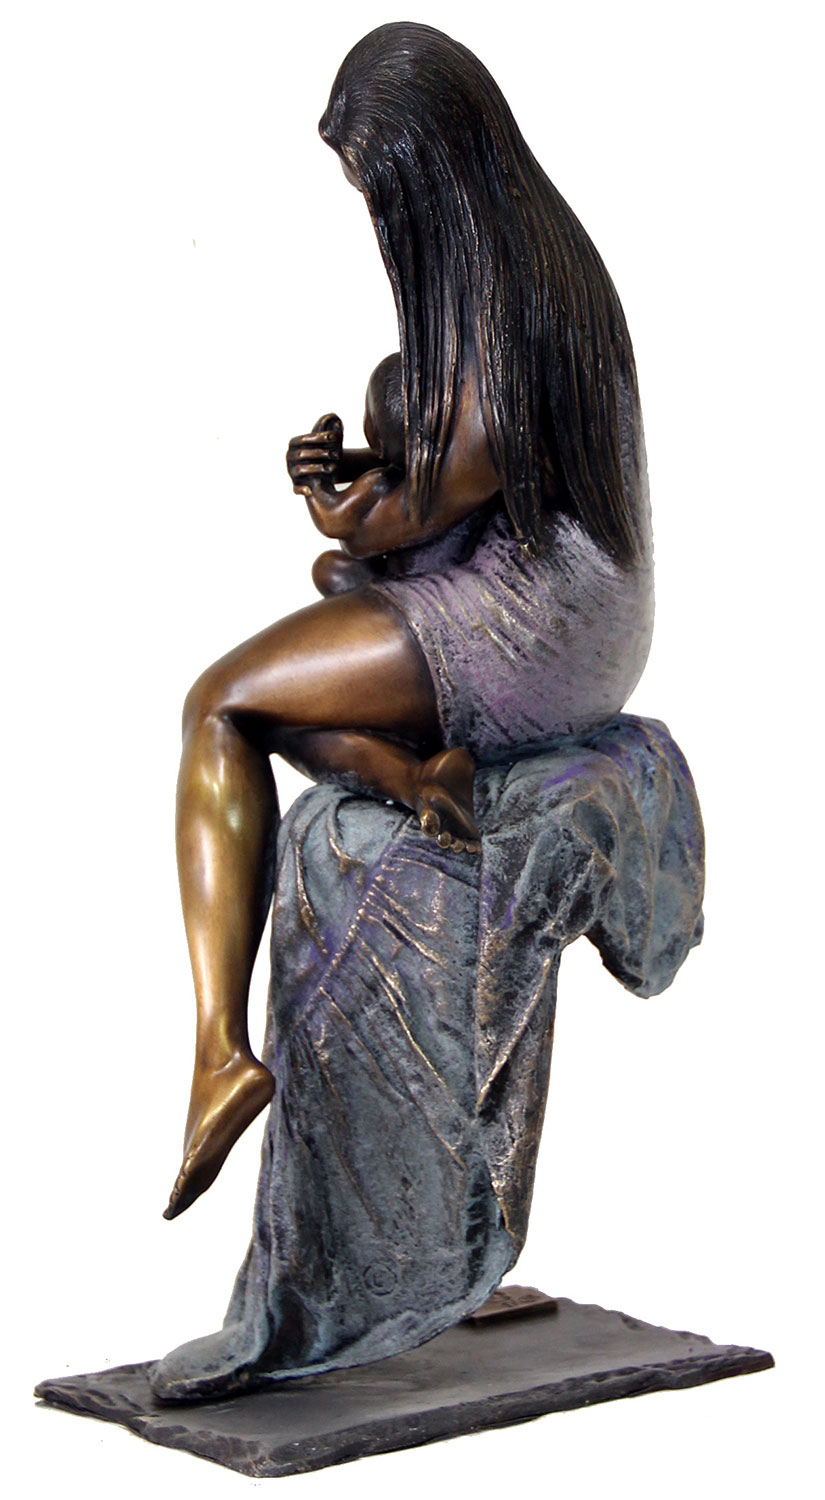 Sculpture "The Love of the Mother", bronze by Manel Vidal